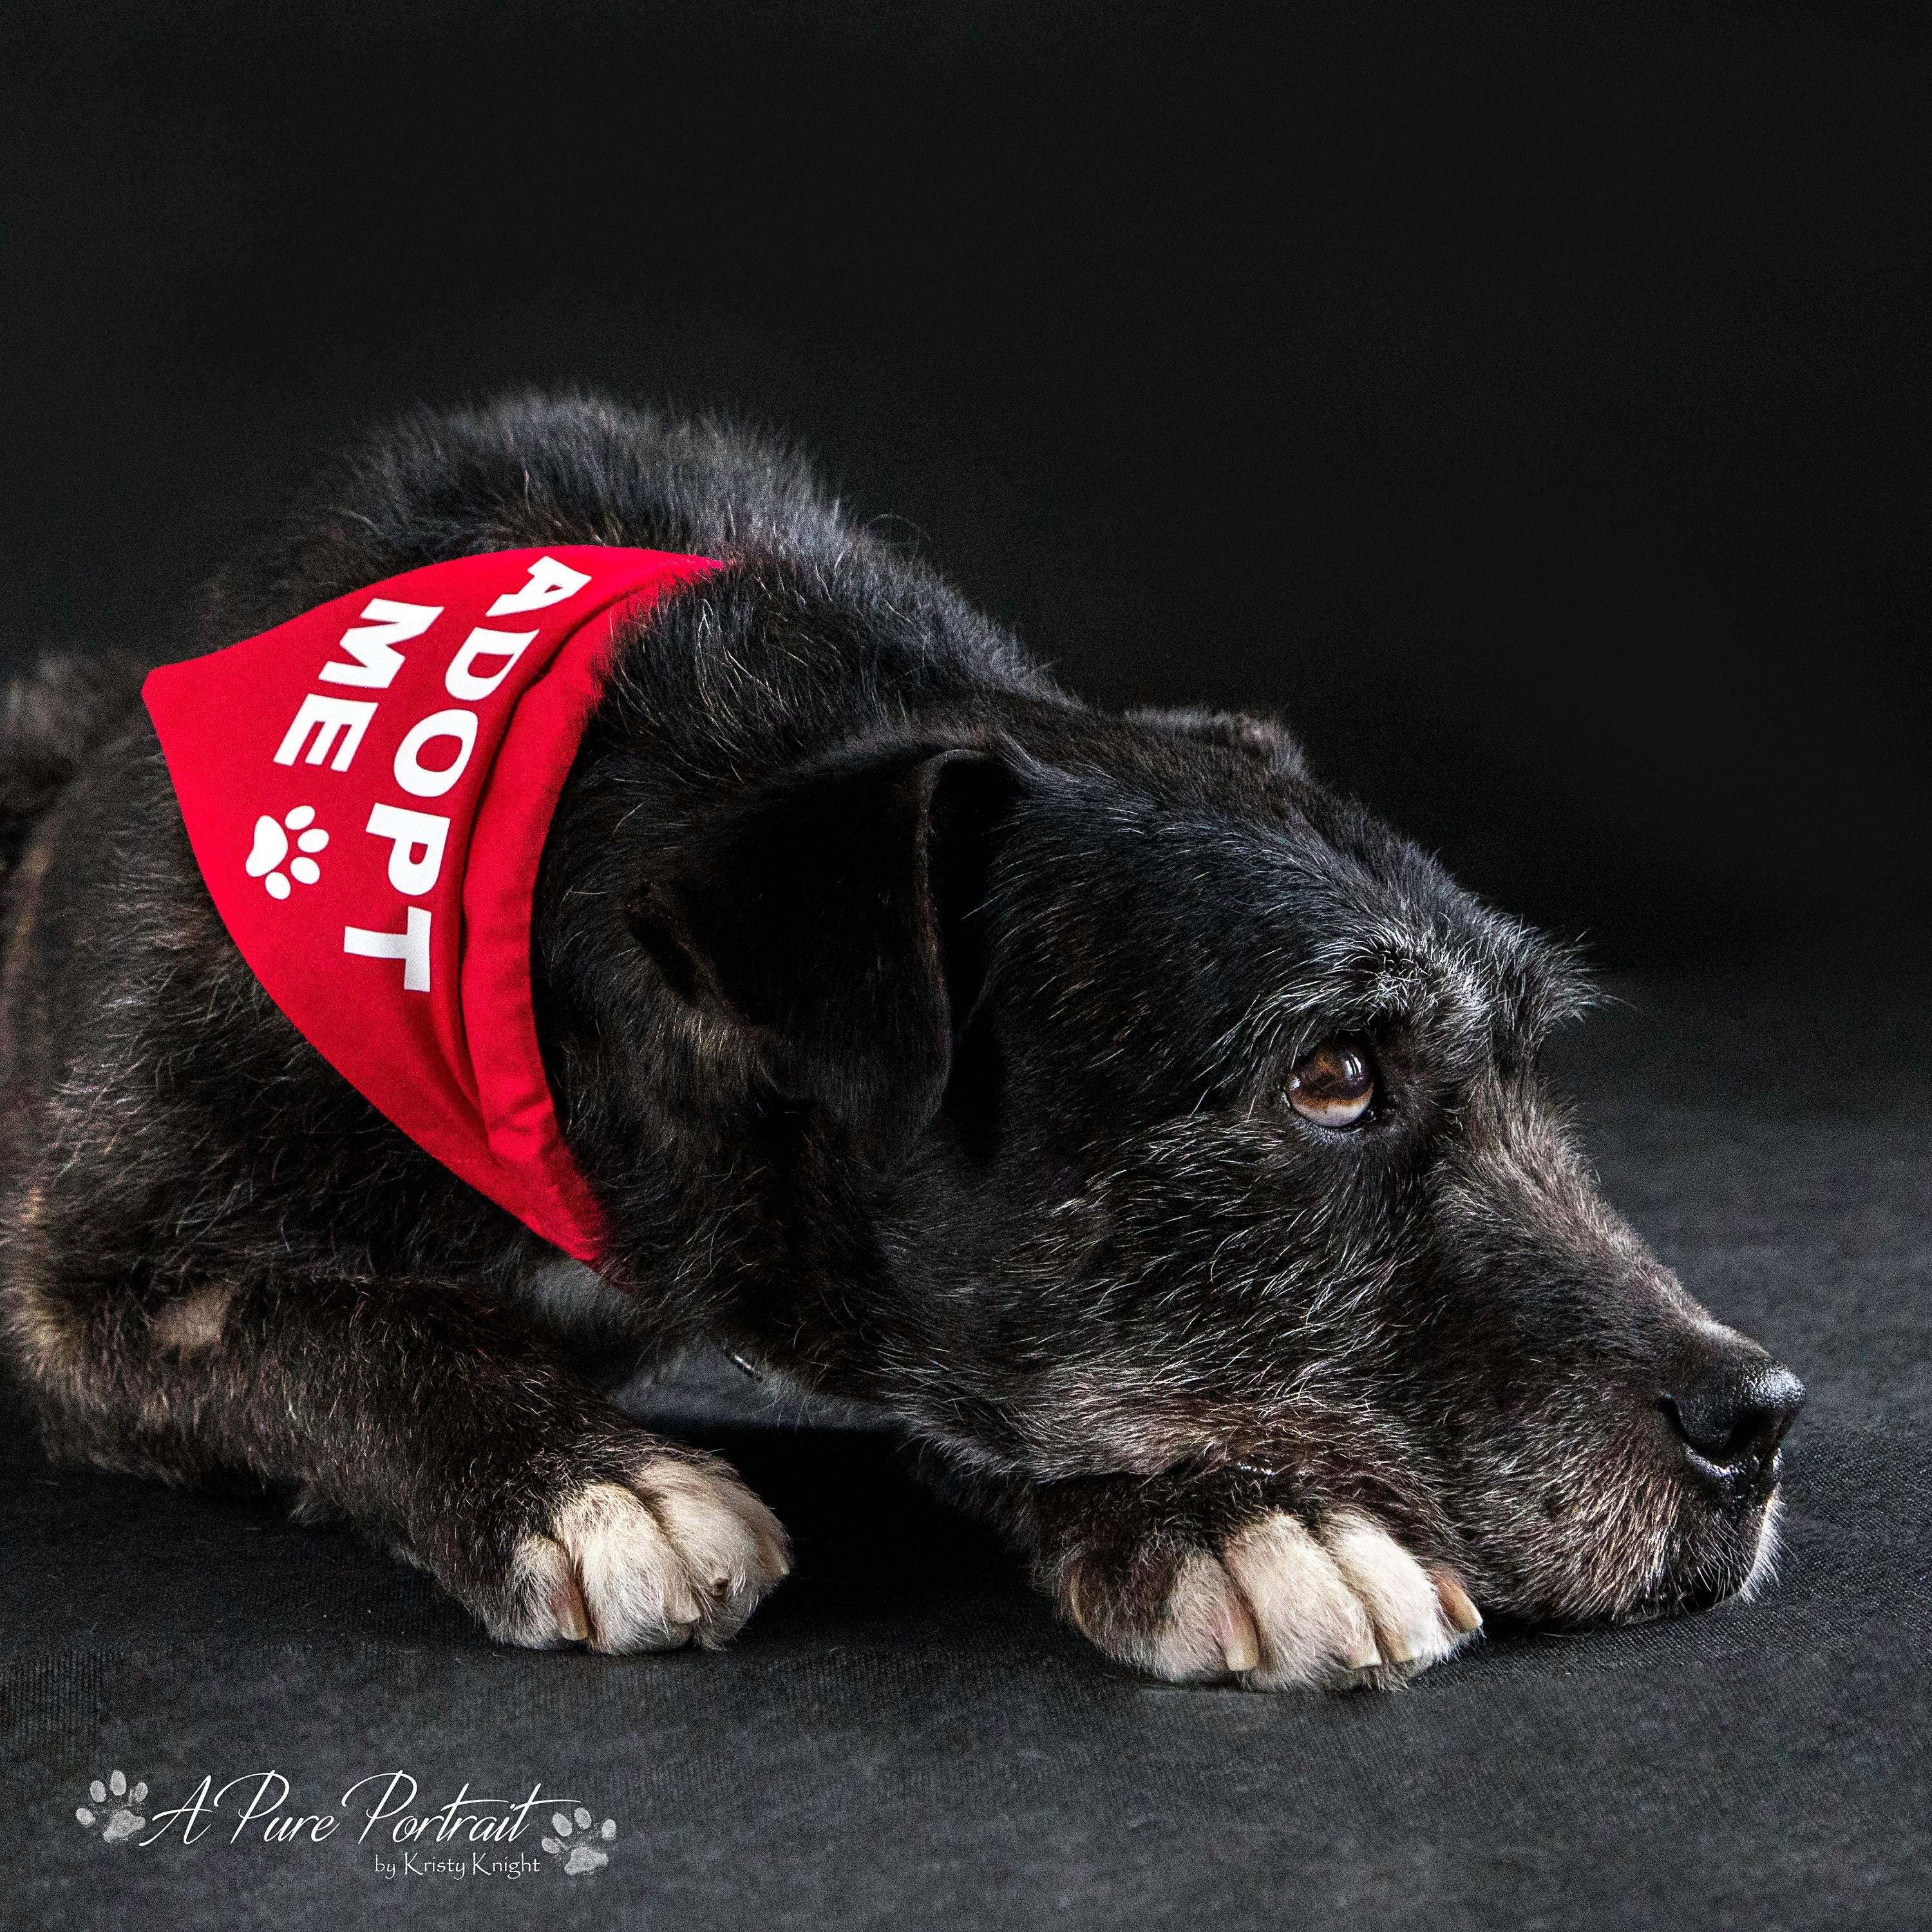 Adopt Me Bandana for Foster Dogs Puppies Rescue Dogs, Promote Adoption, Rescue - My Crafty Dog